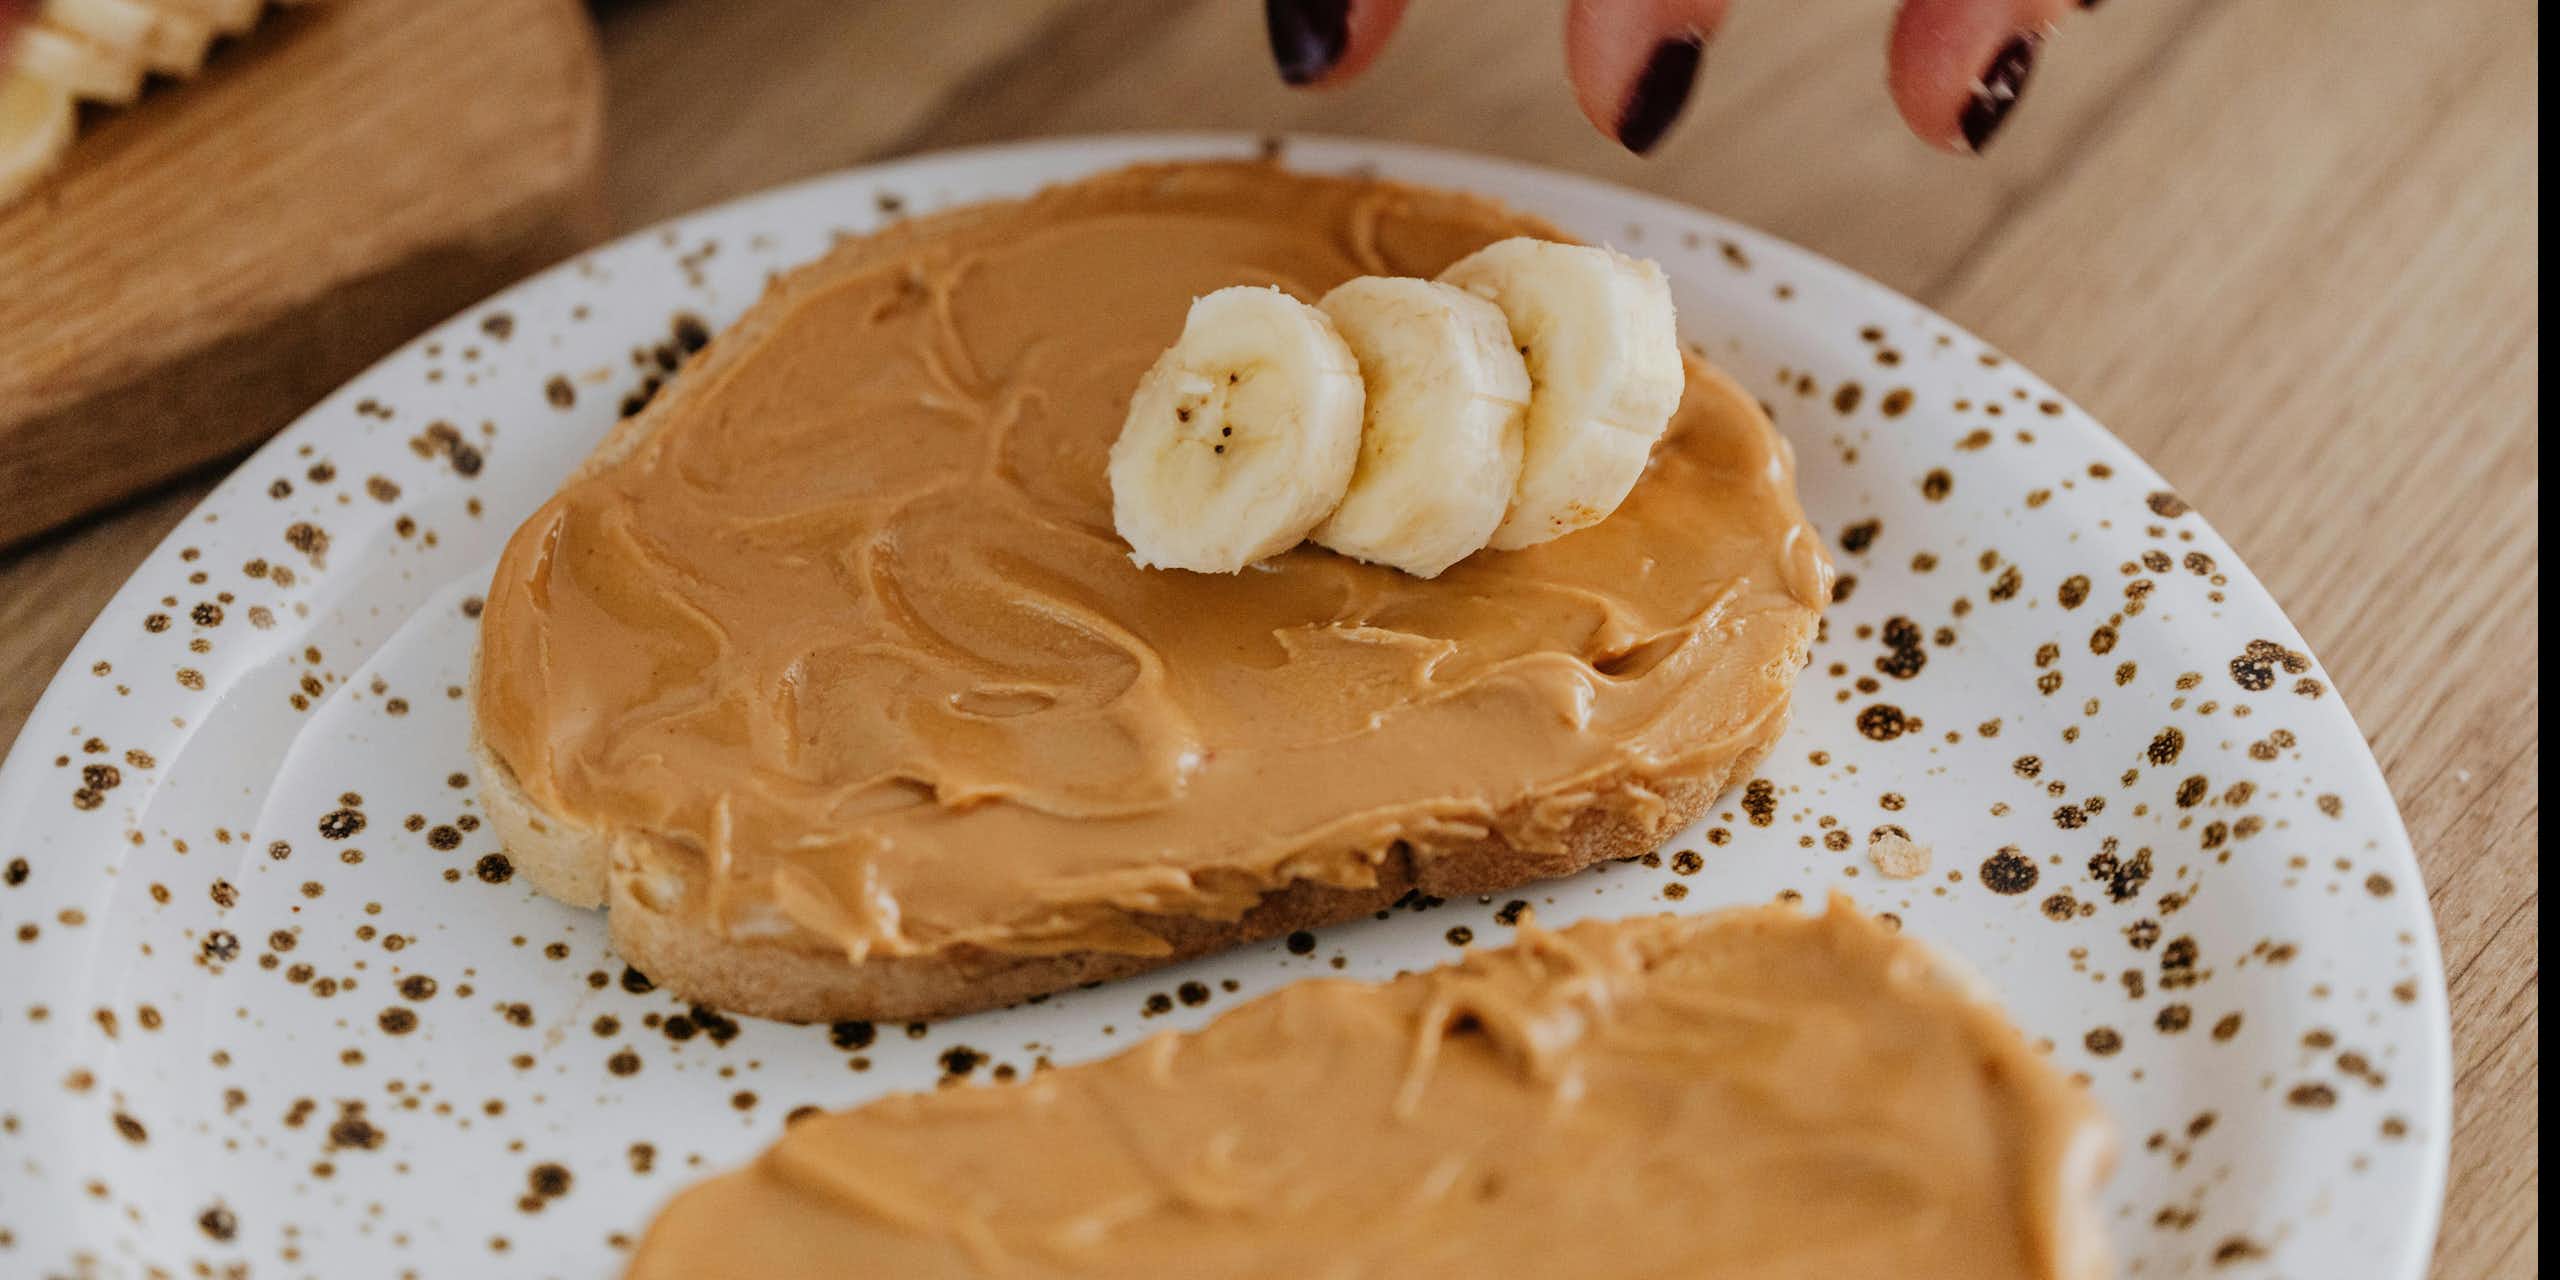 Person puts banana on toast with peanut butter